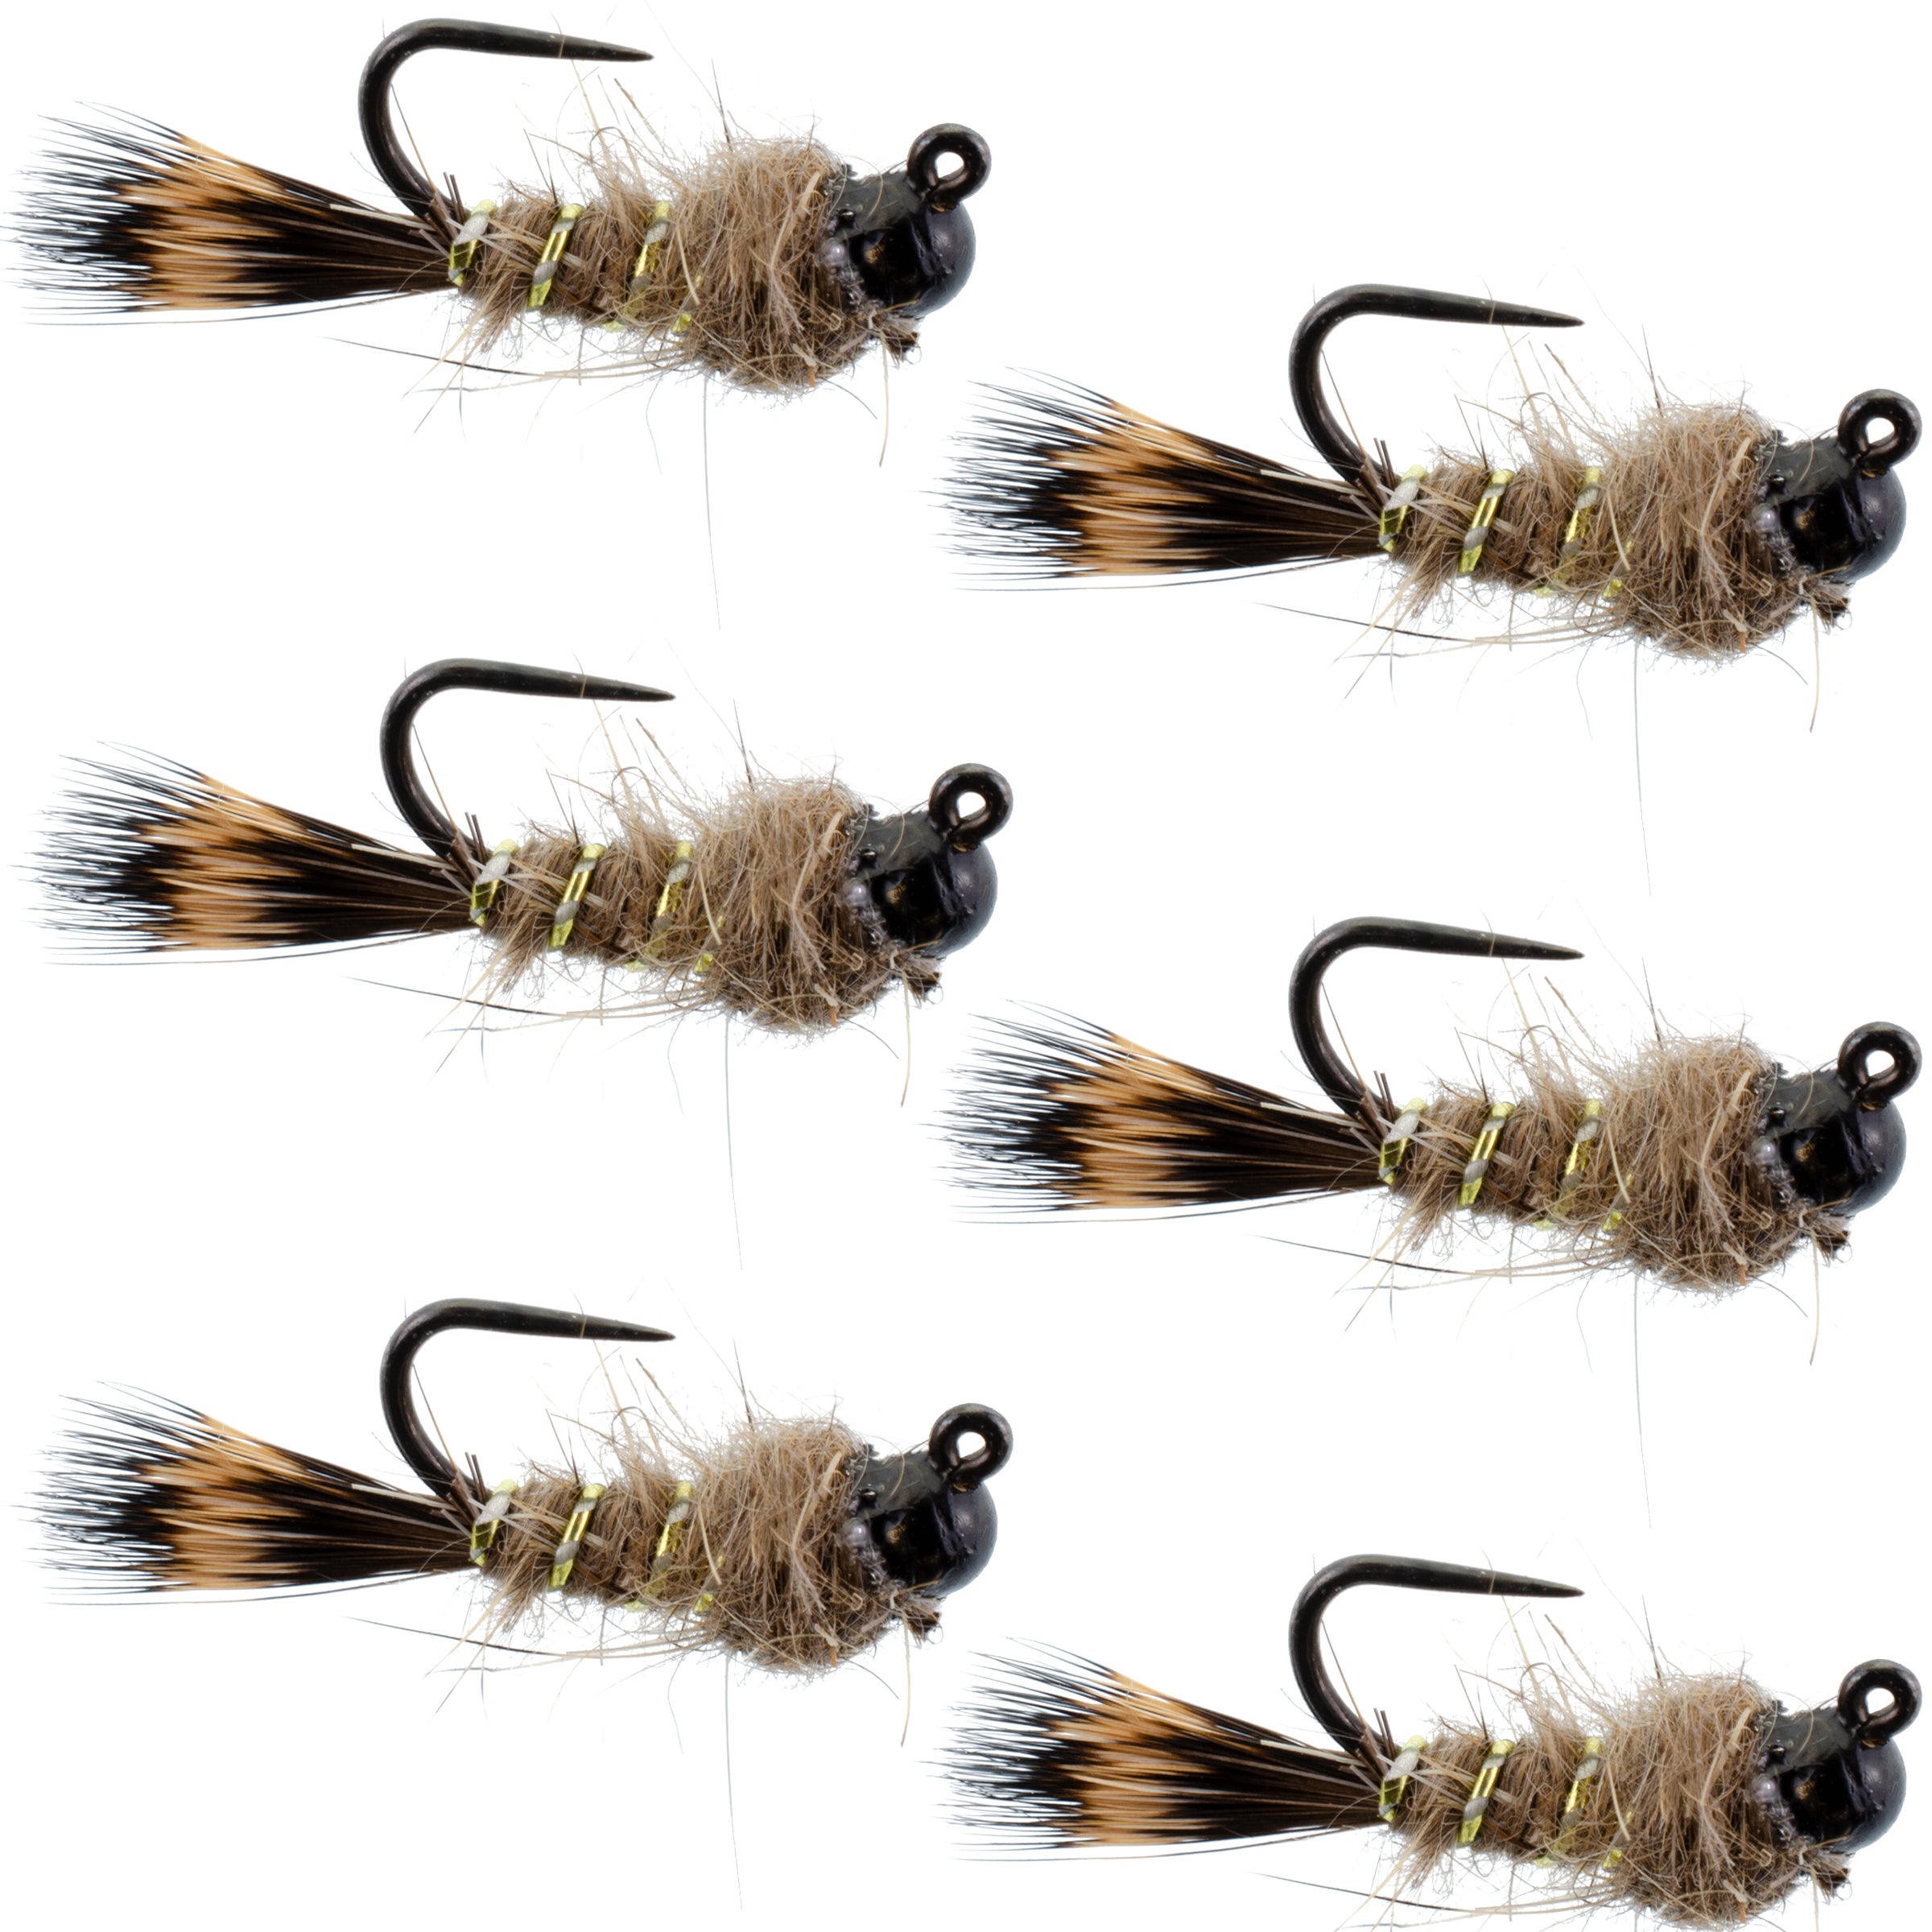 Black Tungsten Bead Tactical Hares Ear Czech Nymph Euro Nymphing Fly - 6 Flies Size 14